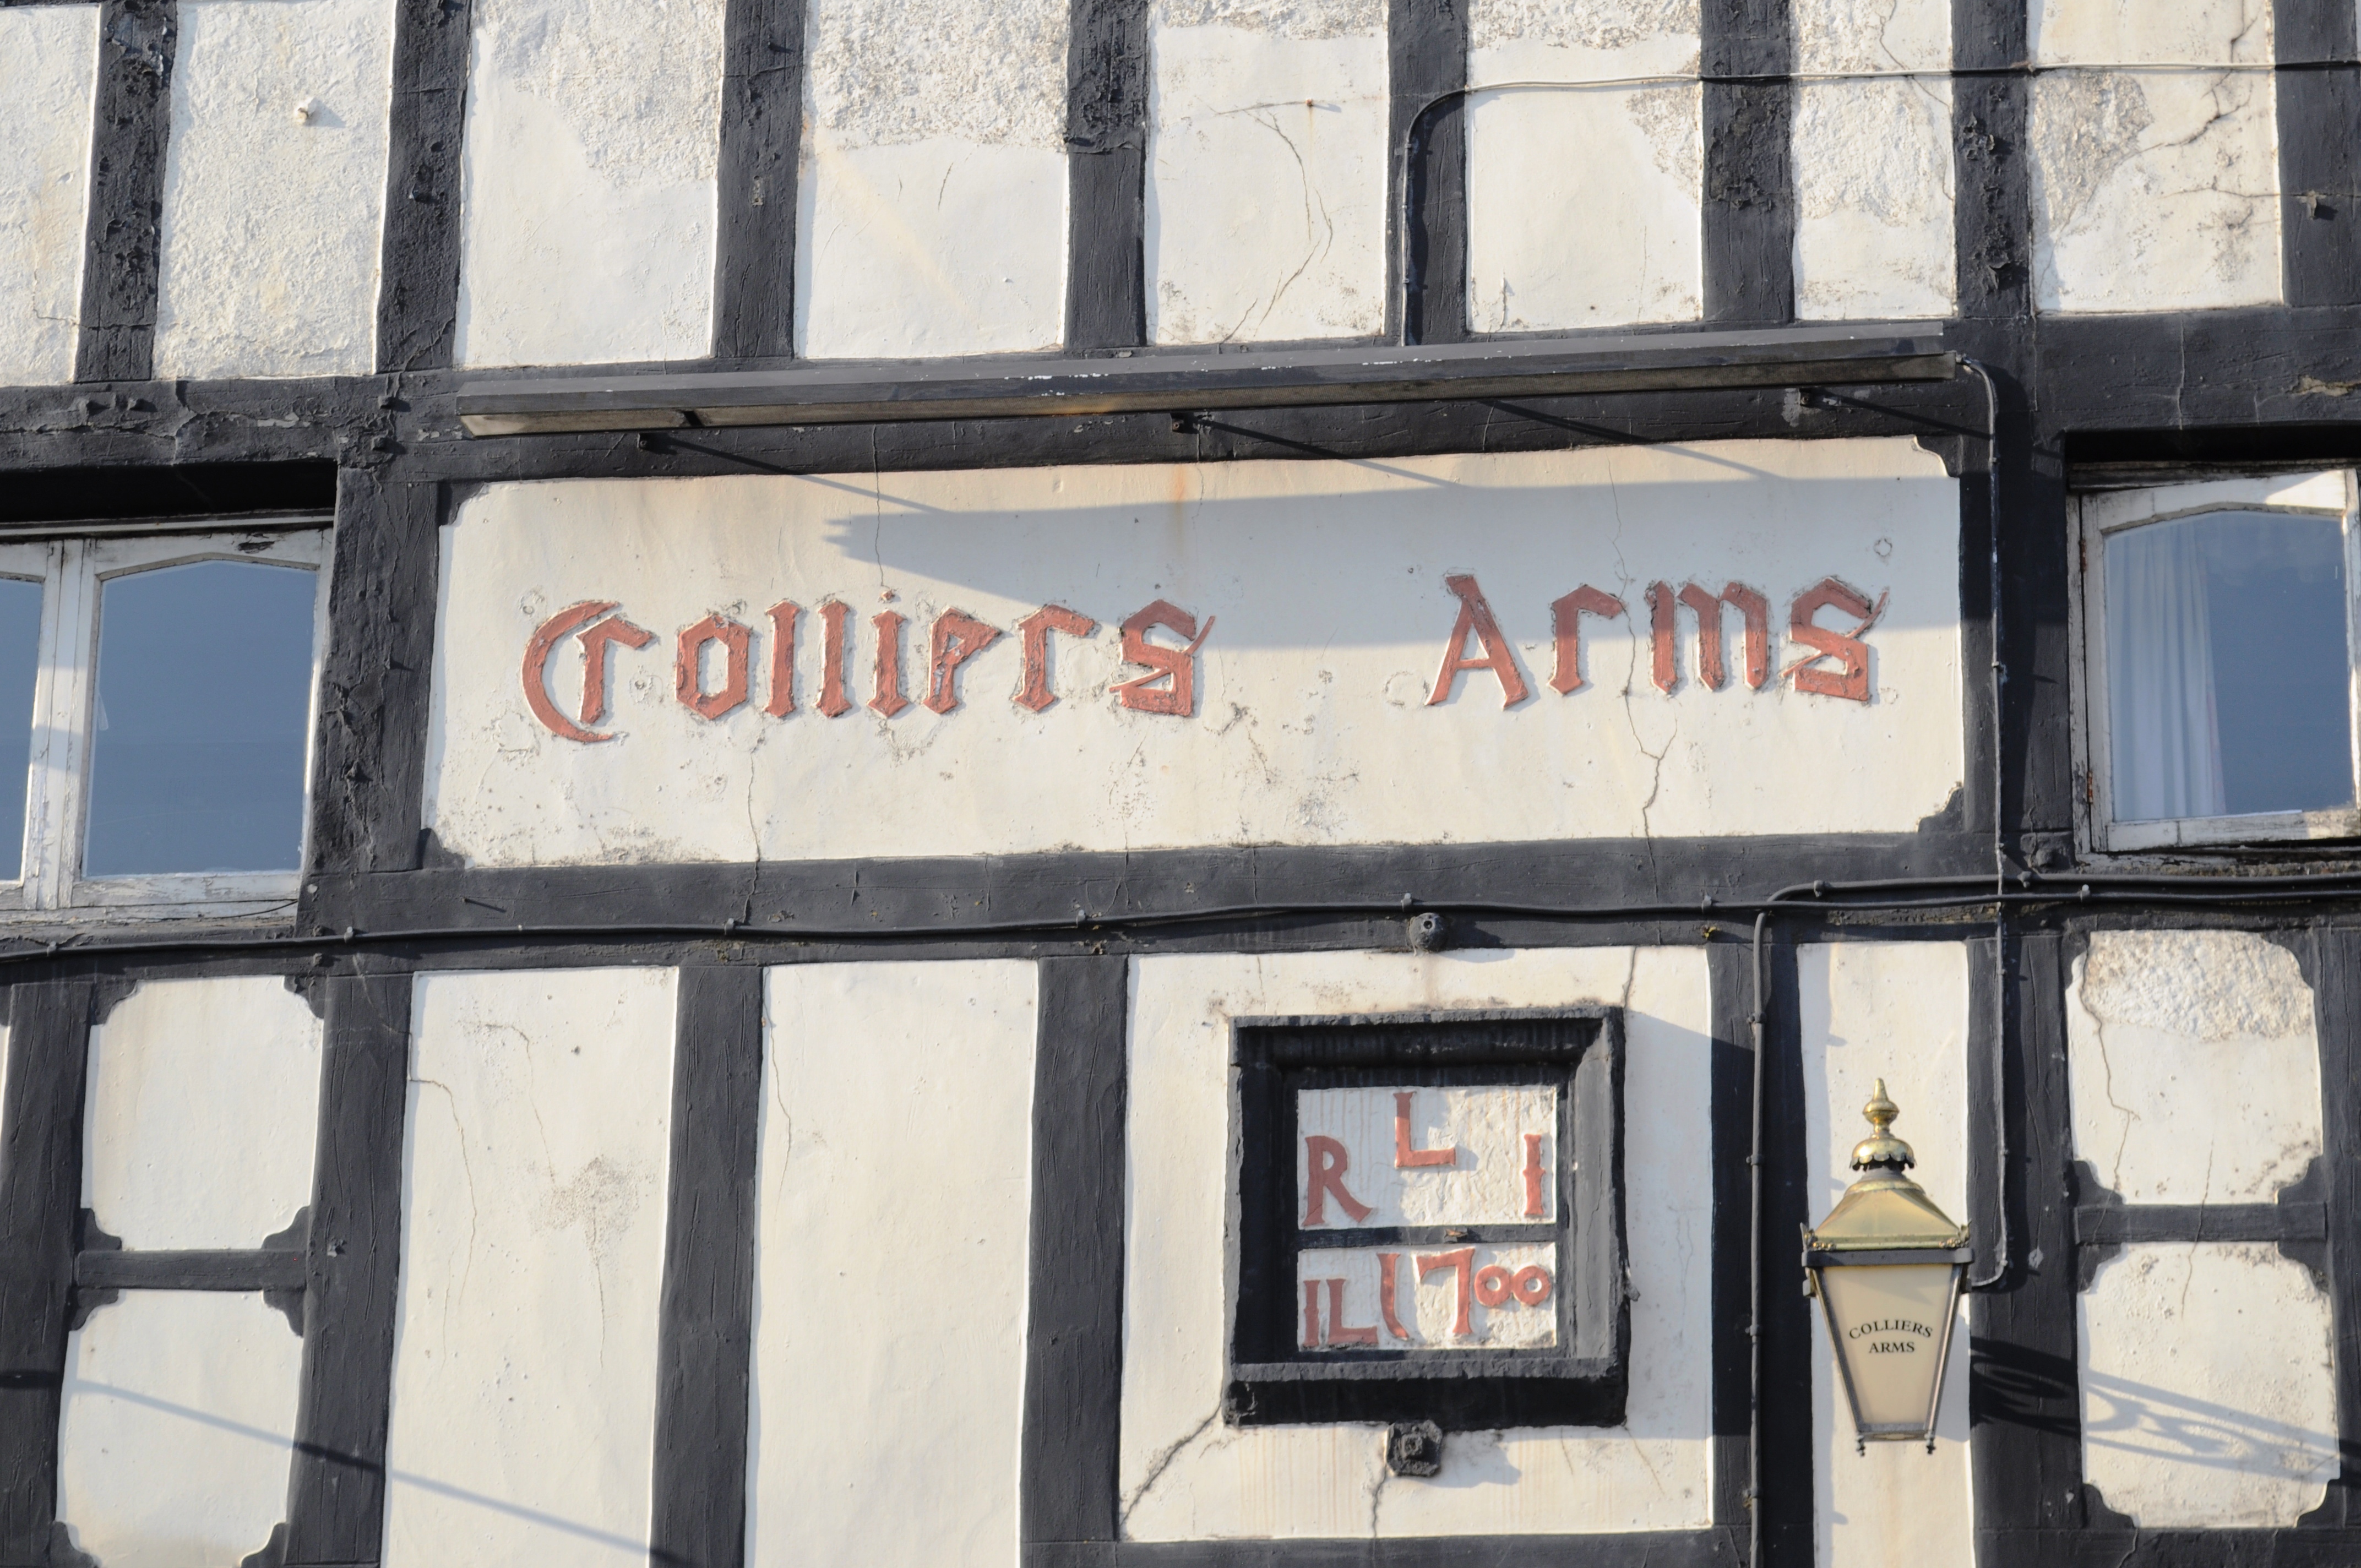 Colliers Arms Public House